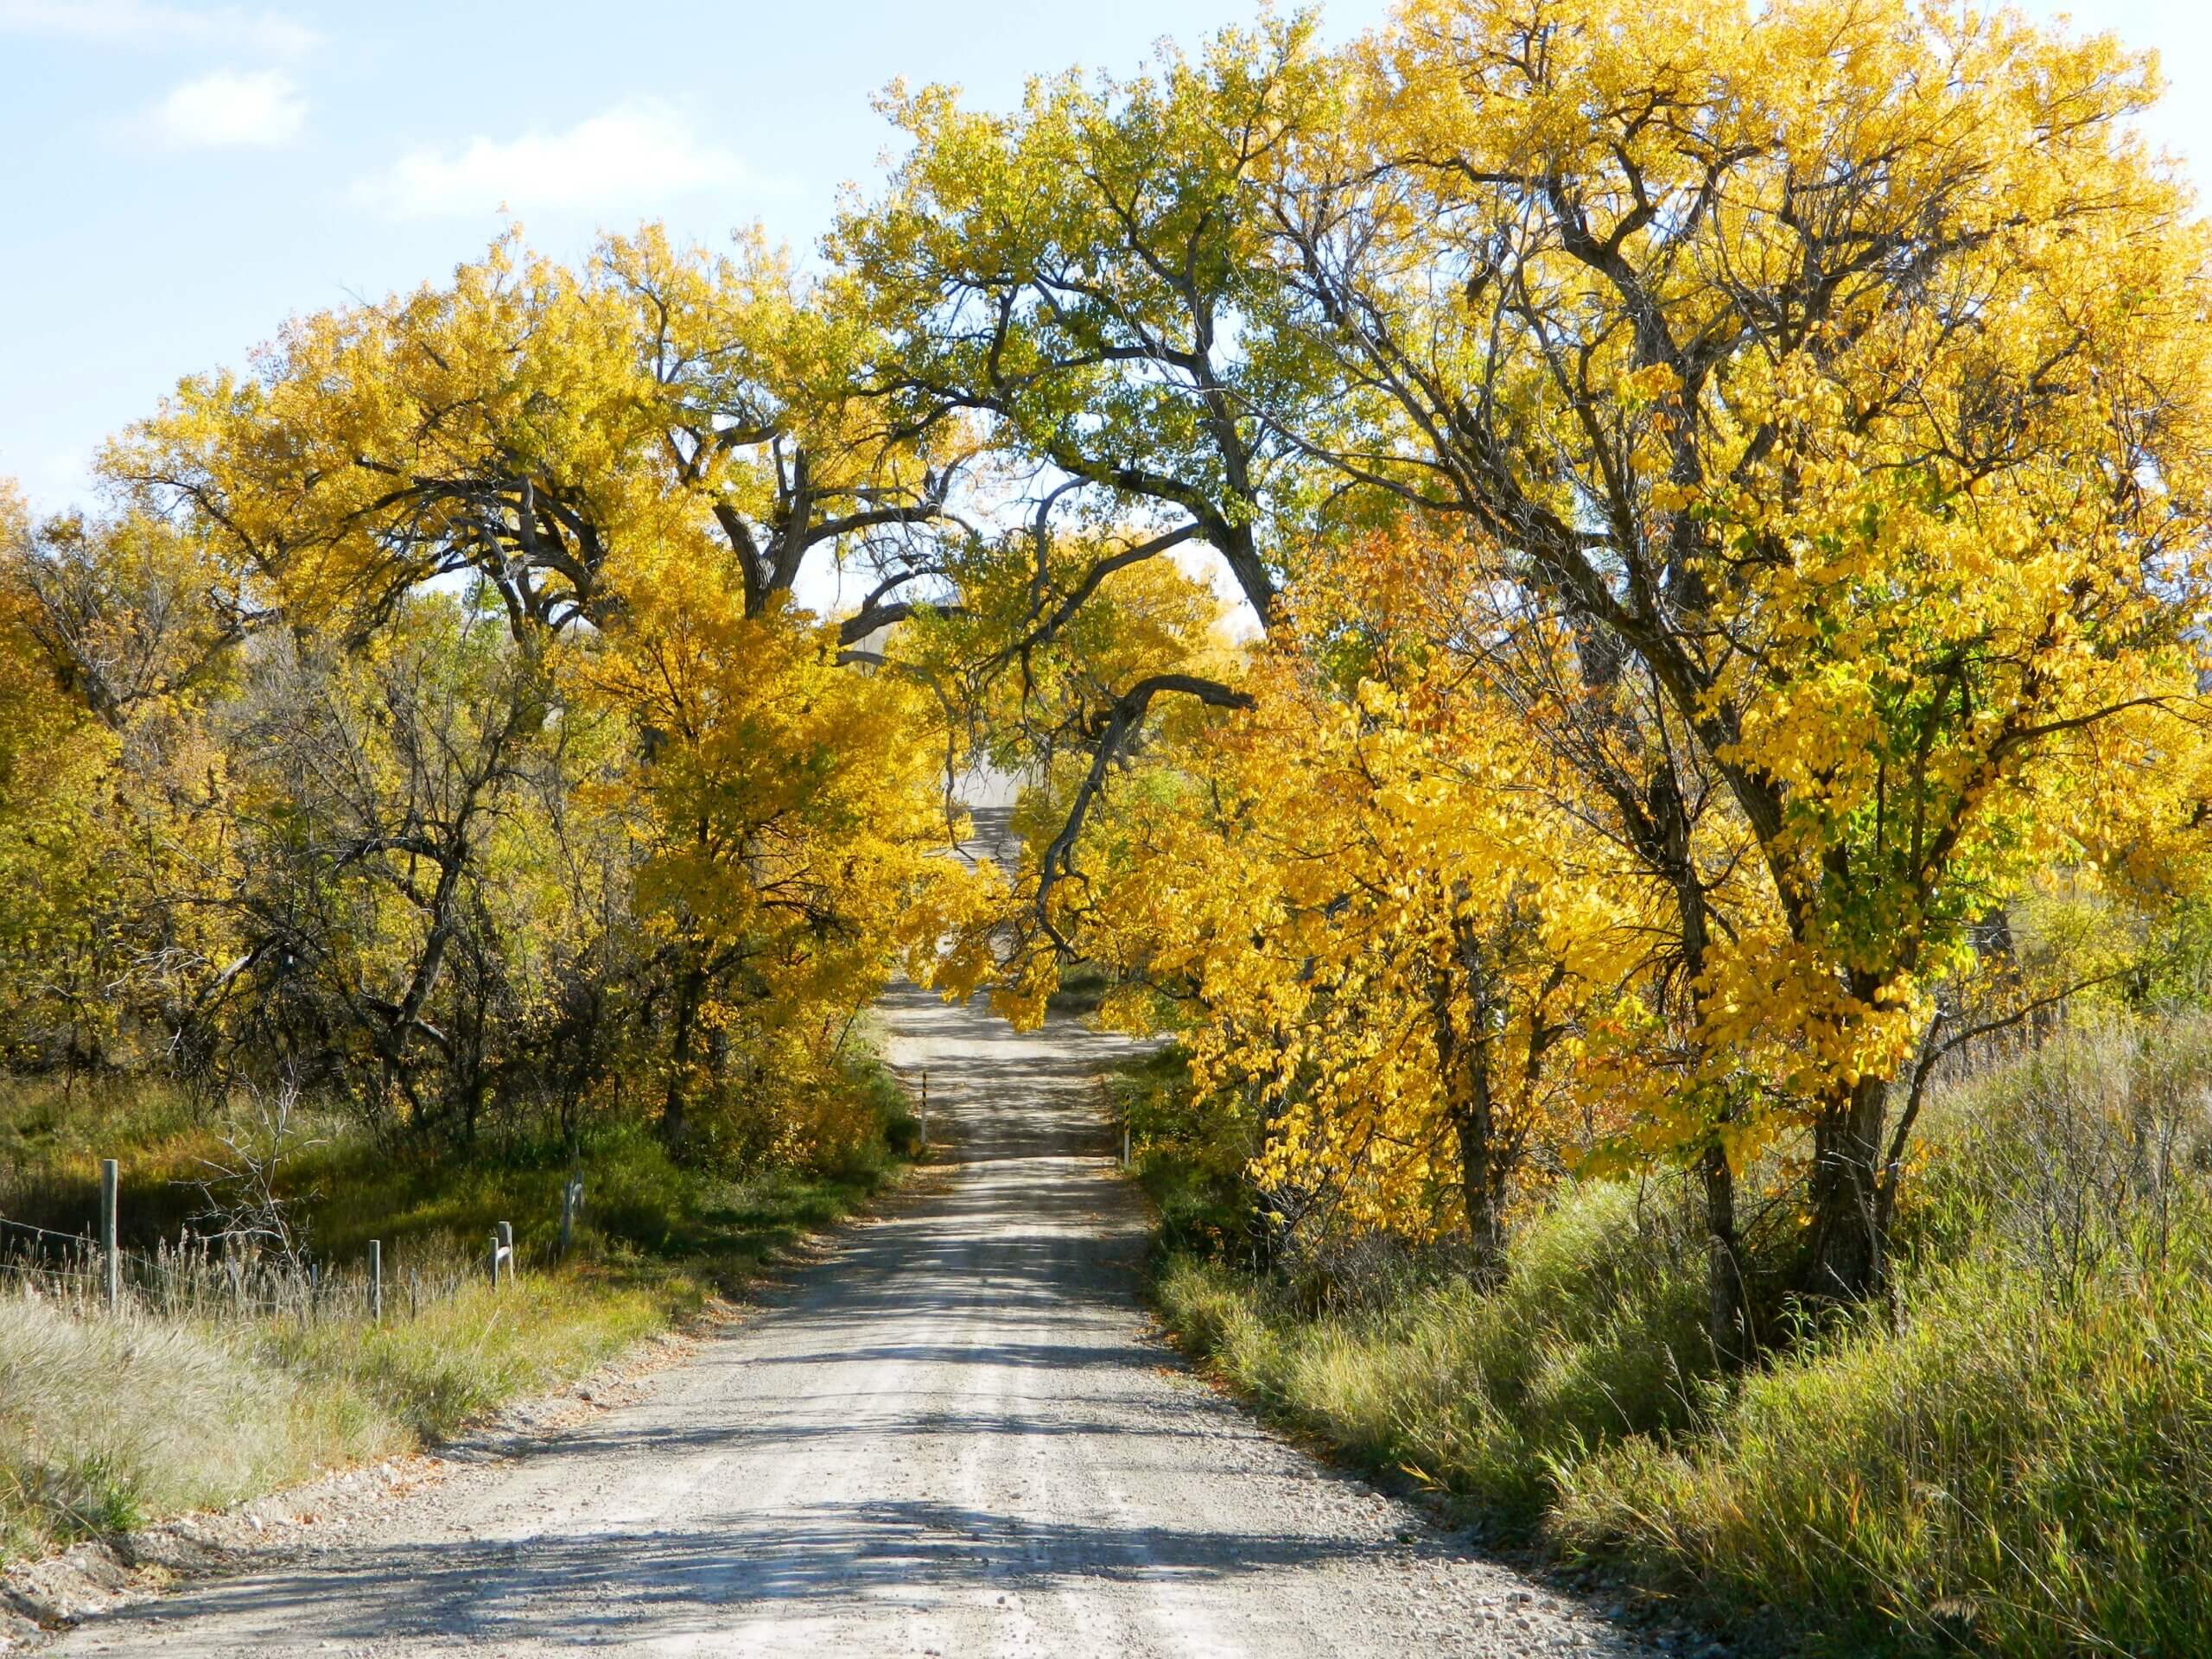 Bethel Road, Whitney Nebraska, lined with Cottonwoods in fall colors.